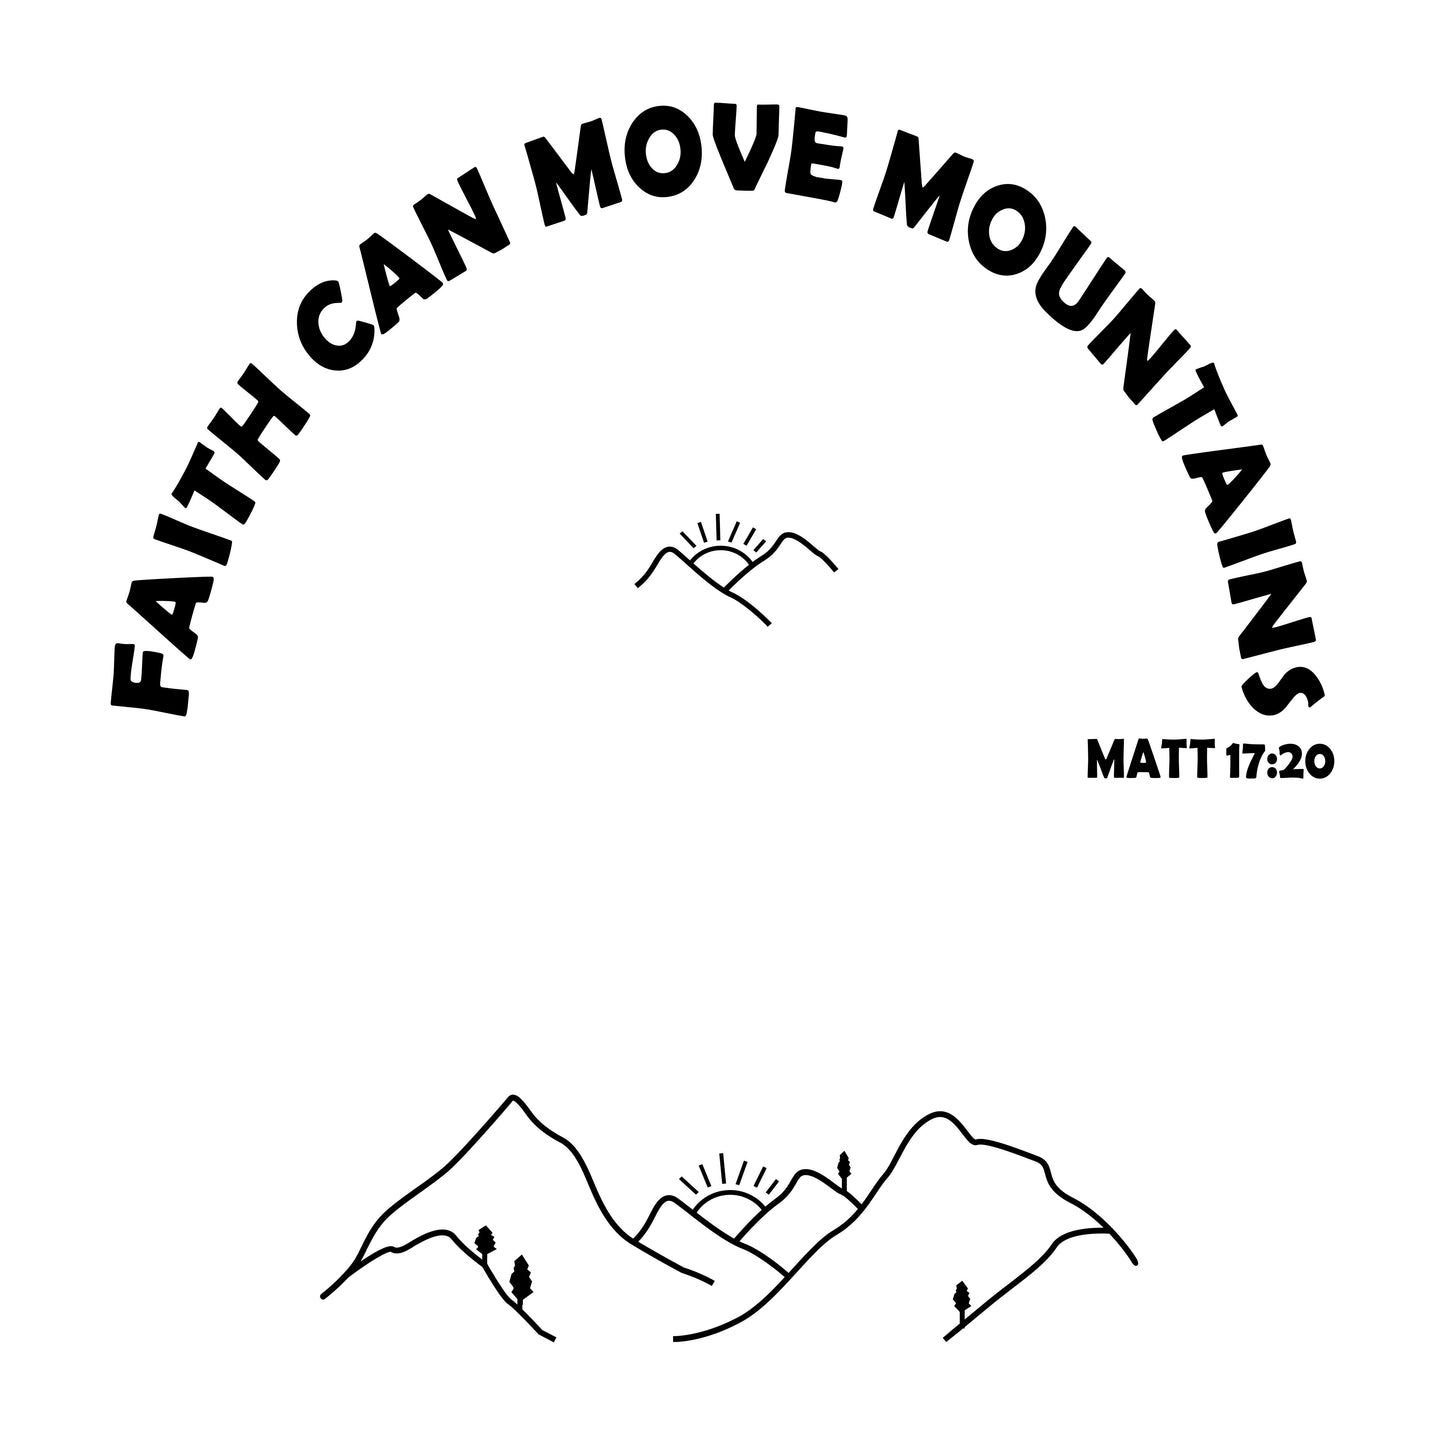 Faith Can Move Mountains hat burning design